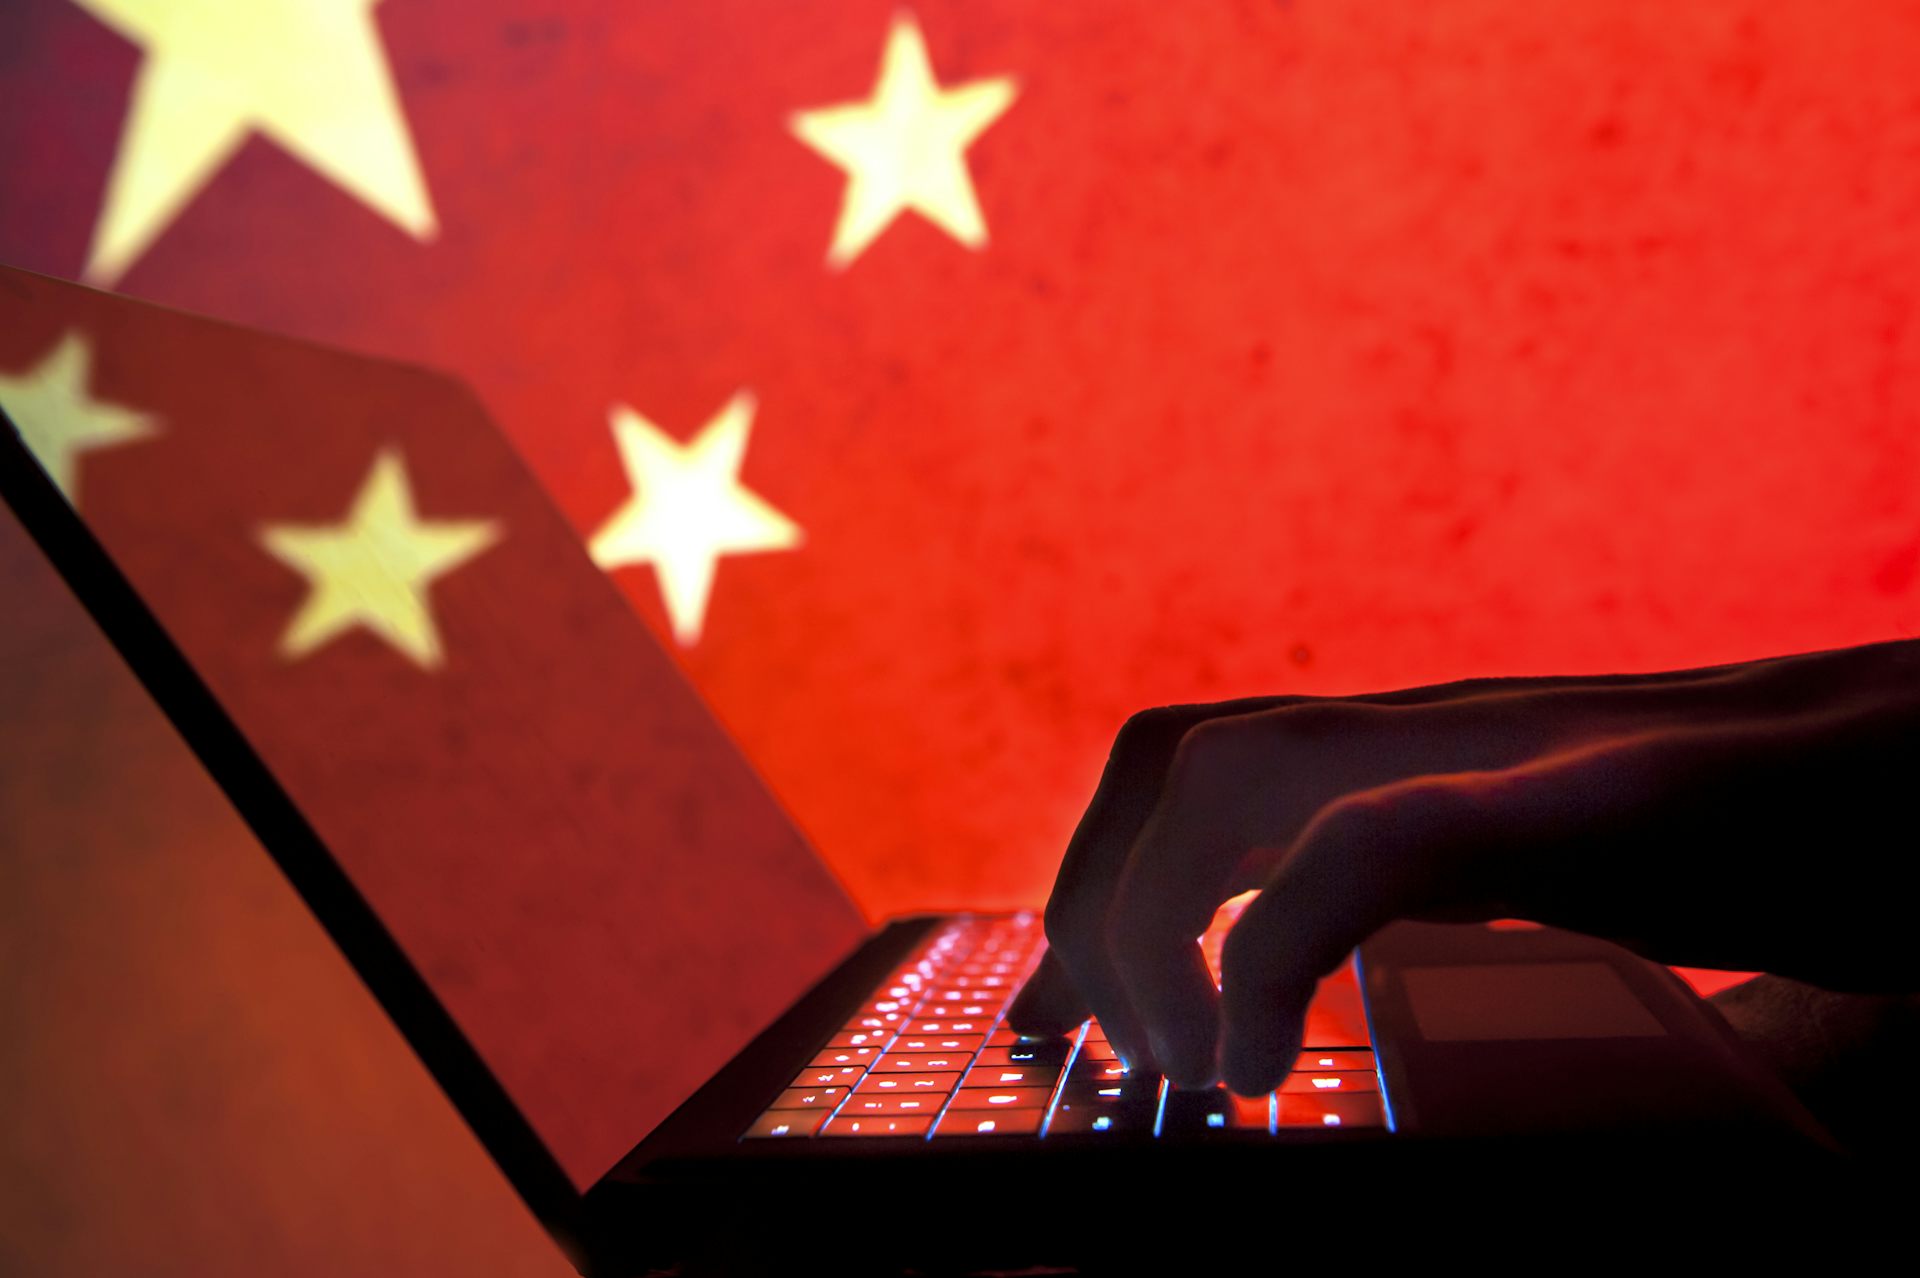 China turns to private hackers as it cracks down on online activists on Tiananmen Square anniversary